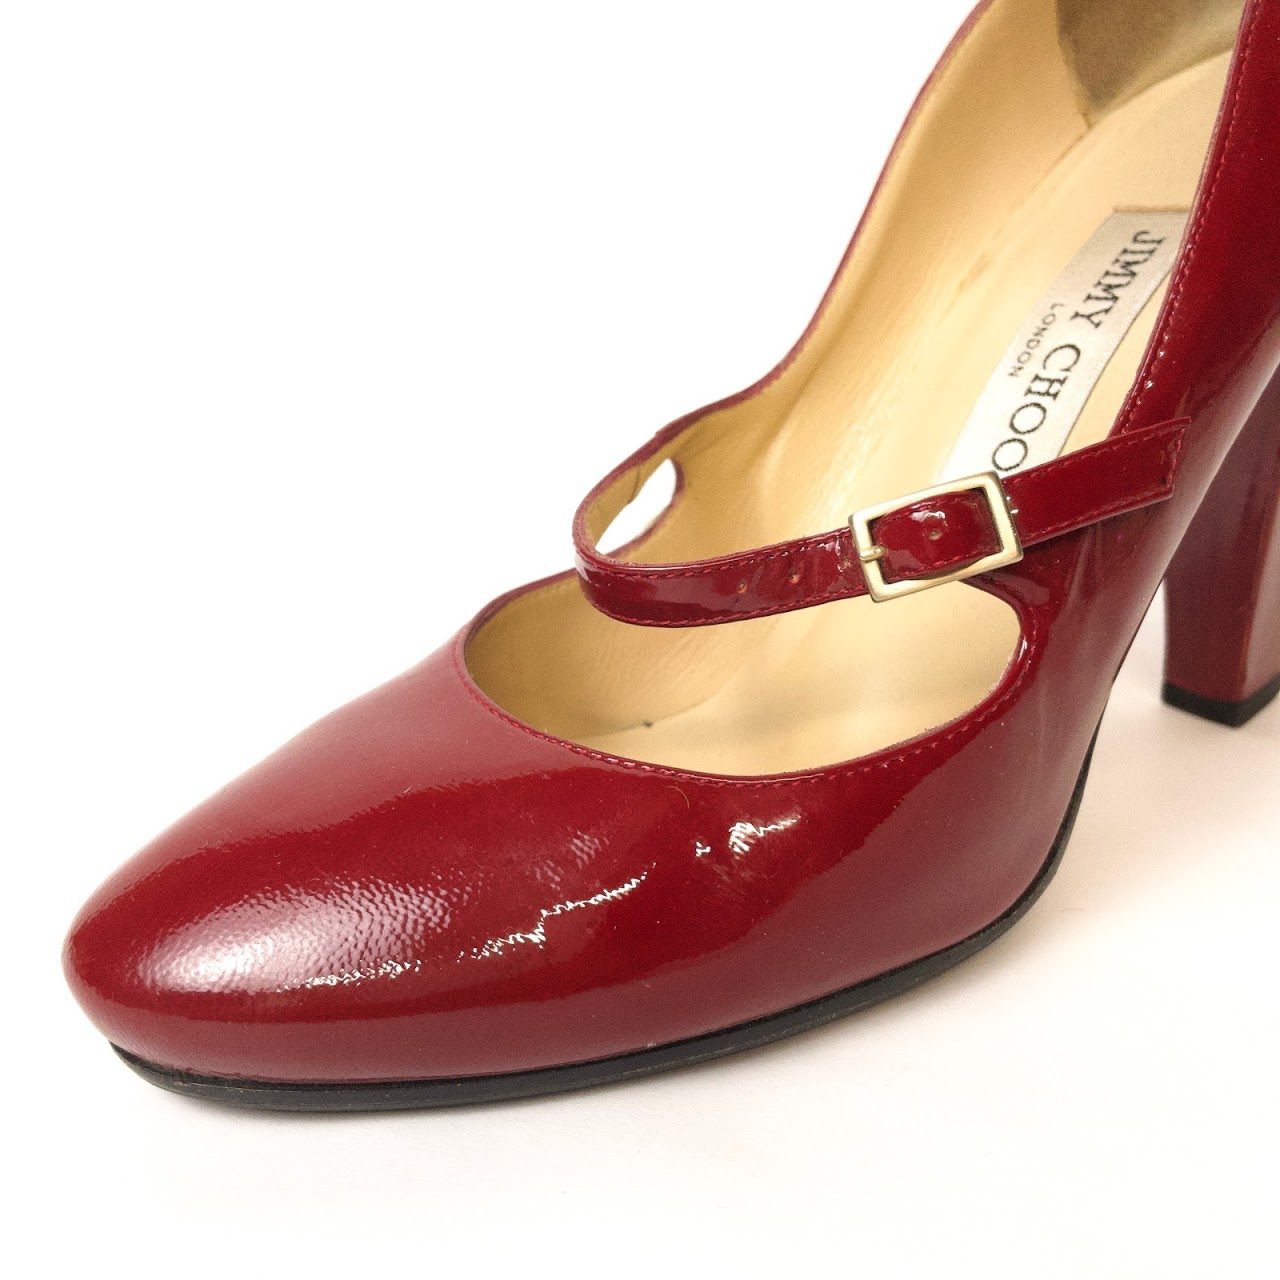 Jimmy Choo Patent Leather Mary-Jane Pumps